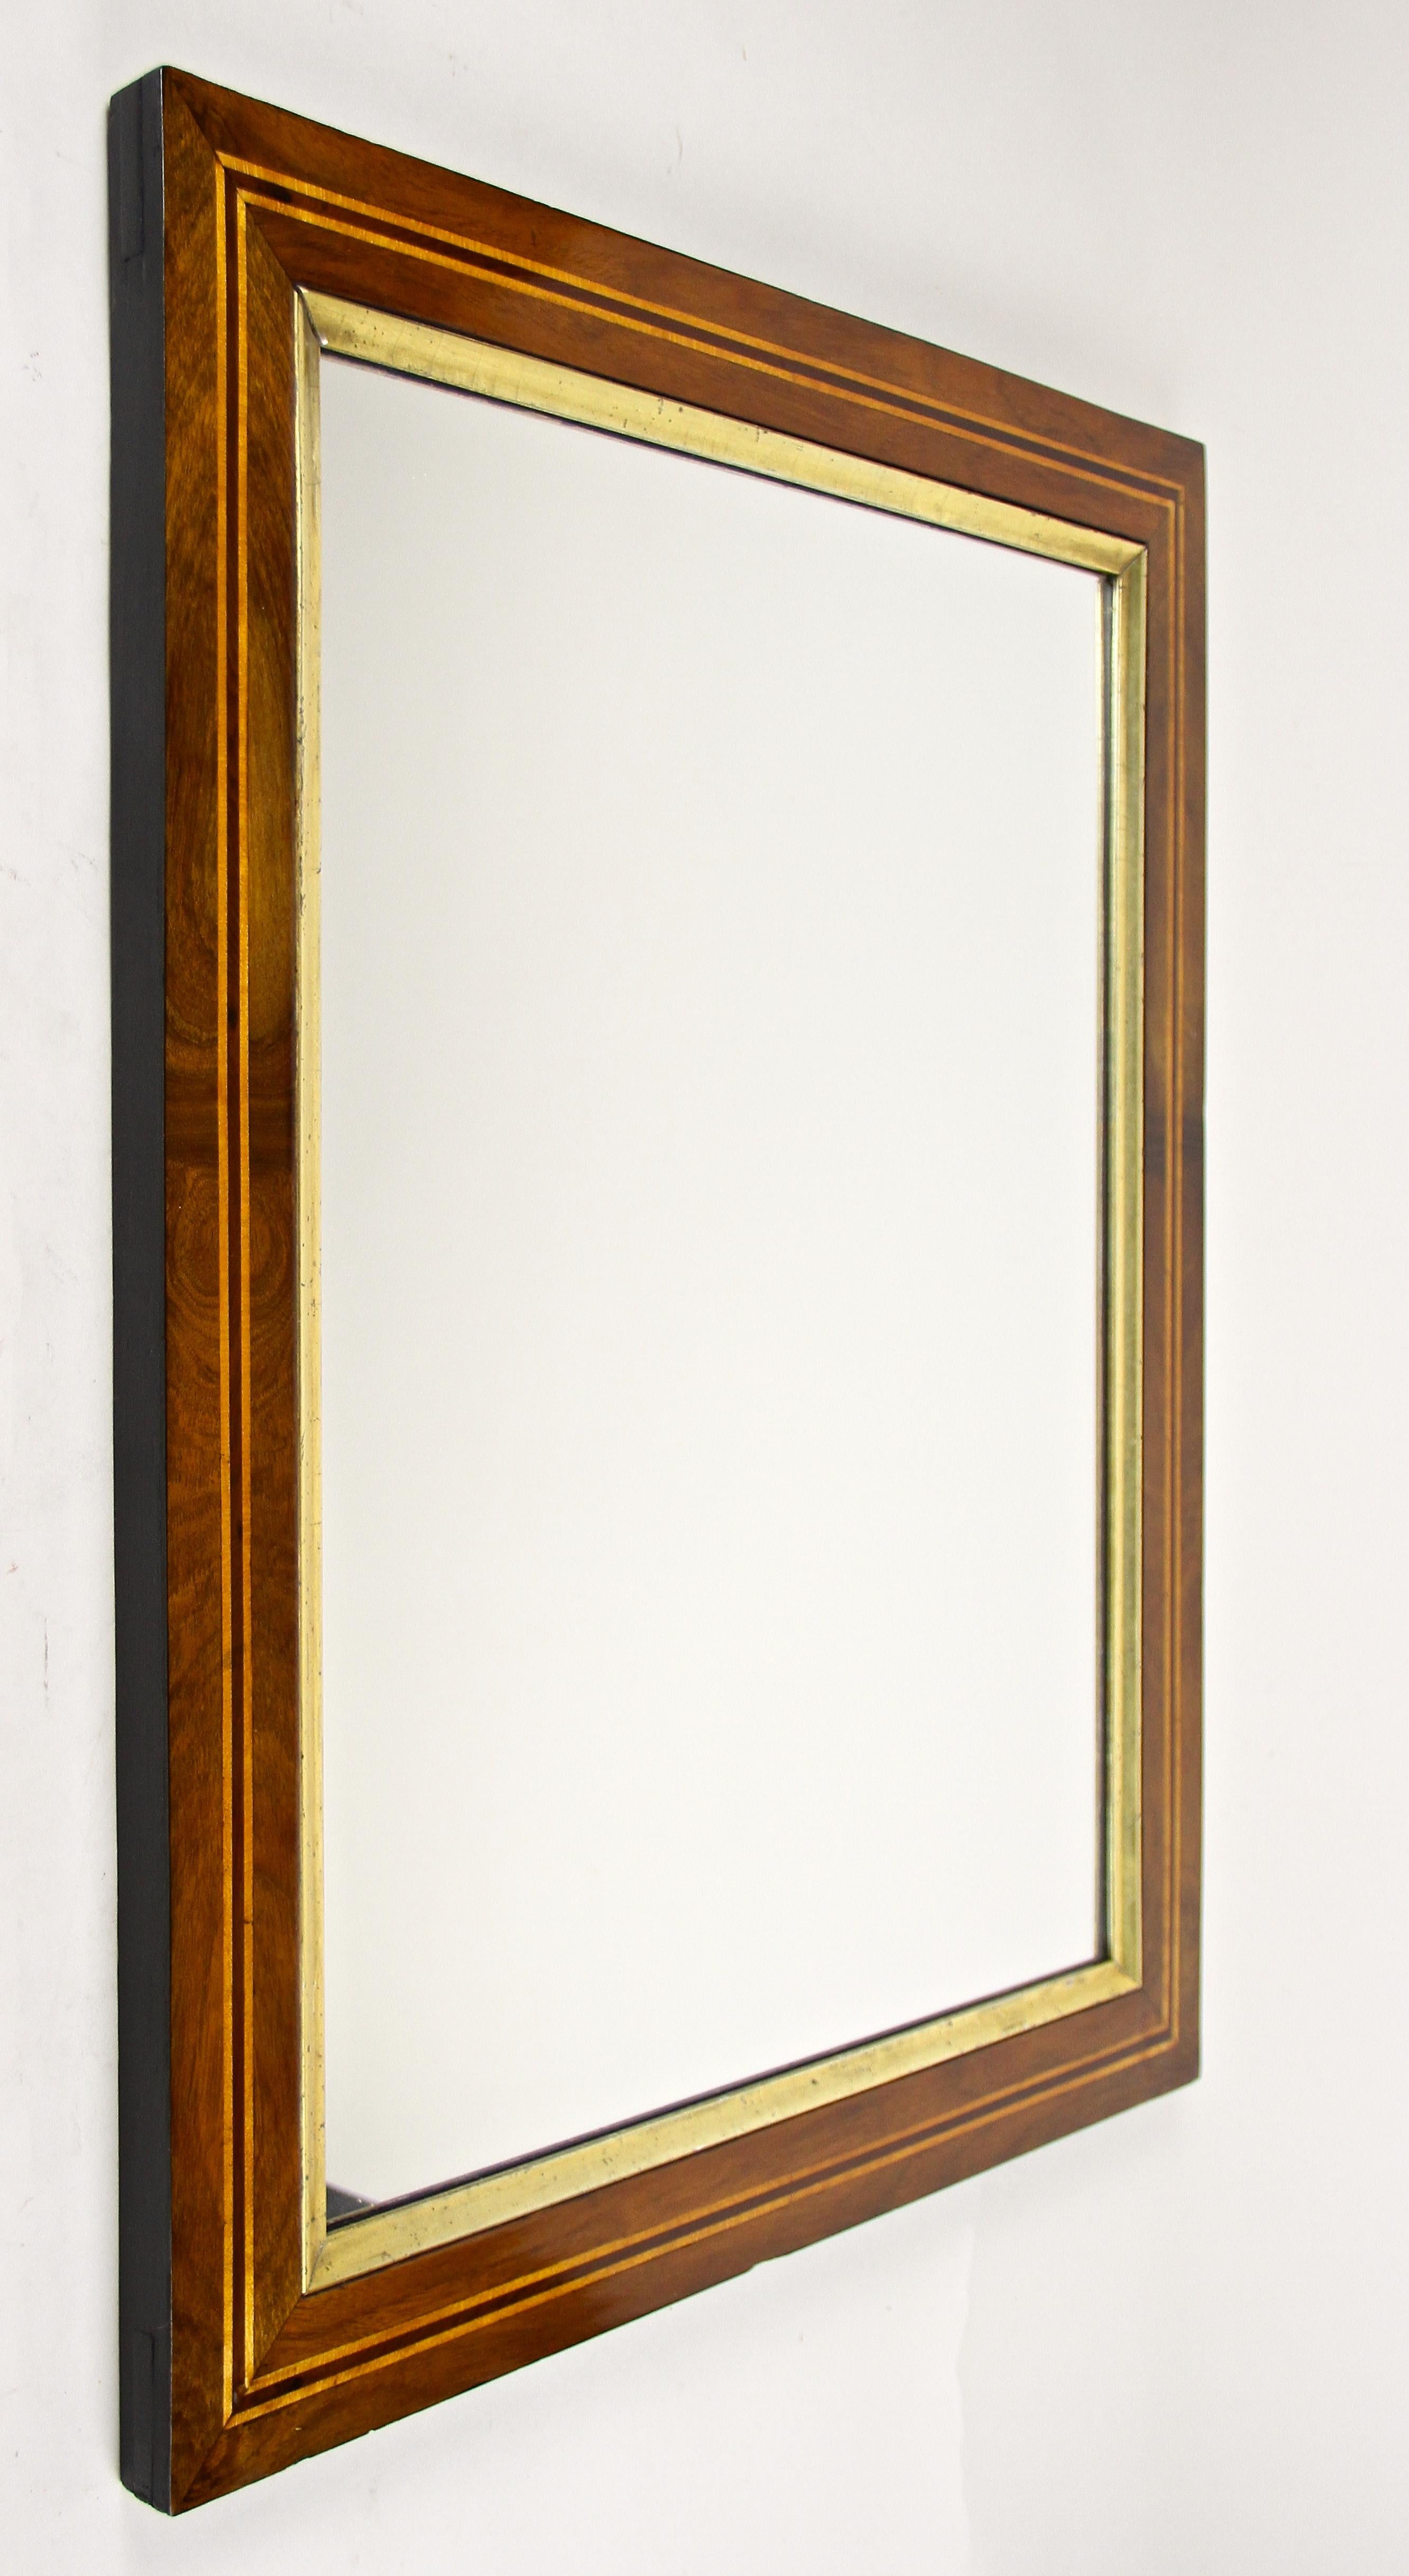 Superb 19th century nutwood wall mirror from the famous Biedermeier period circa 1840 in Austria. The frame built of spruce wood with an overlapping inserted sub-structure, shows a beautiful thick nut wood veneered surface. An additional, very